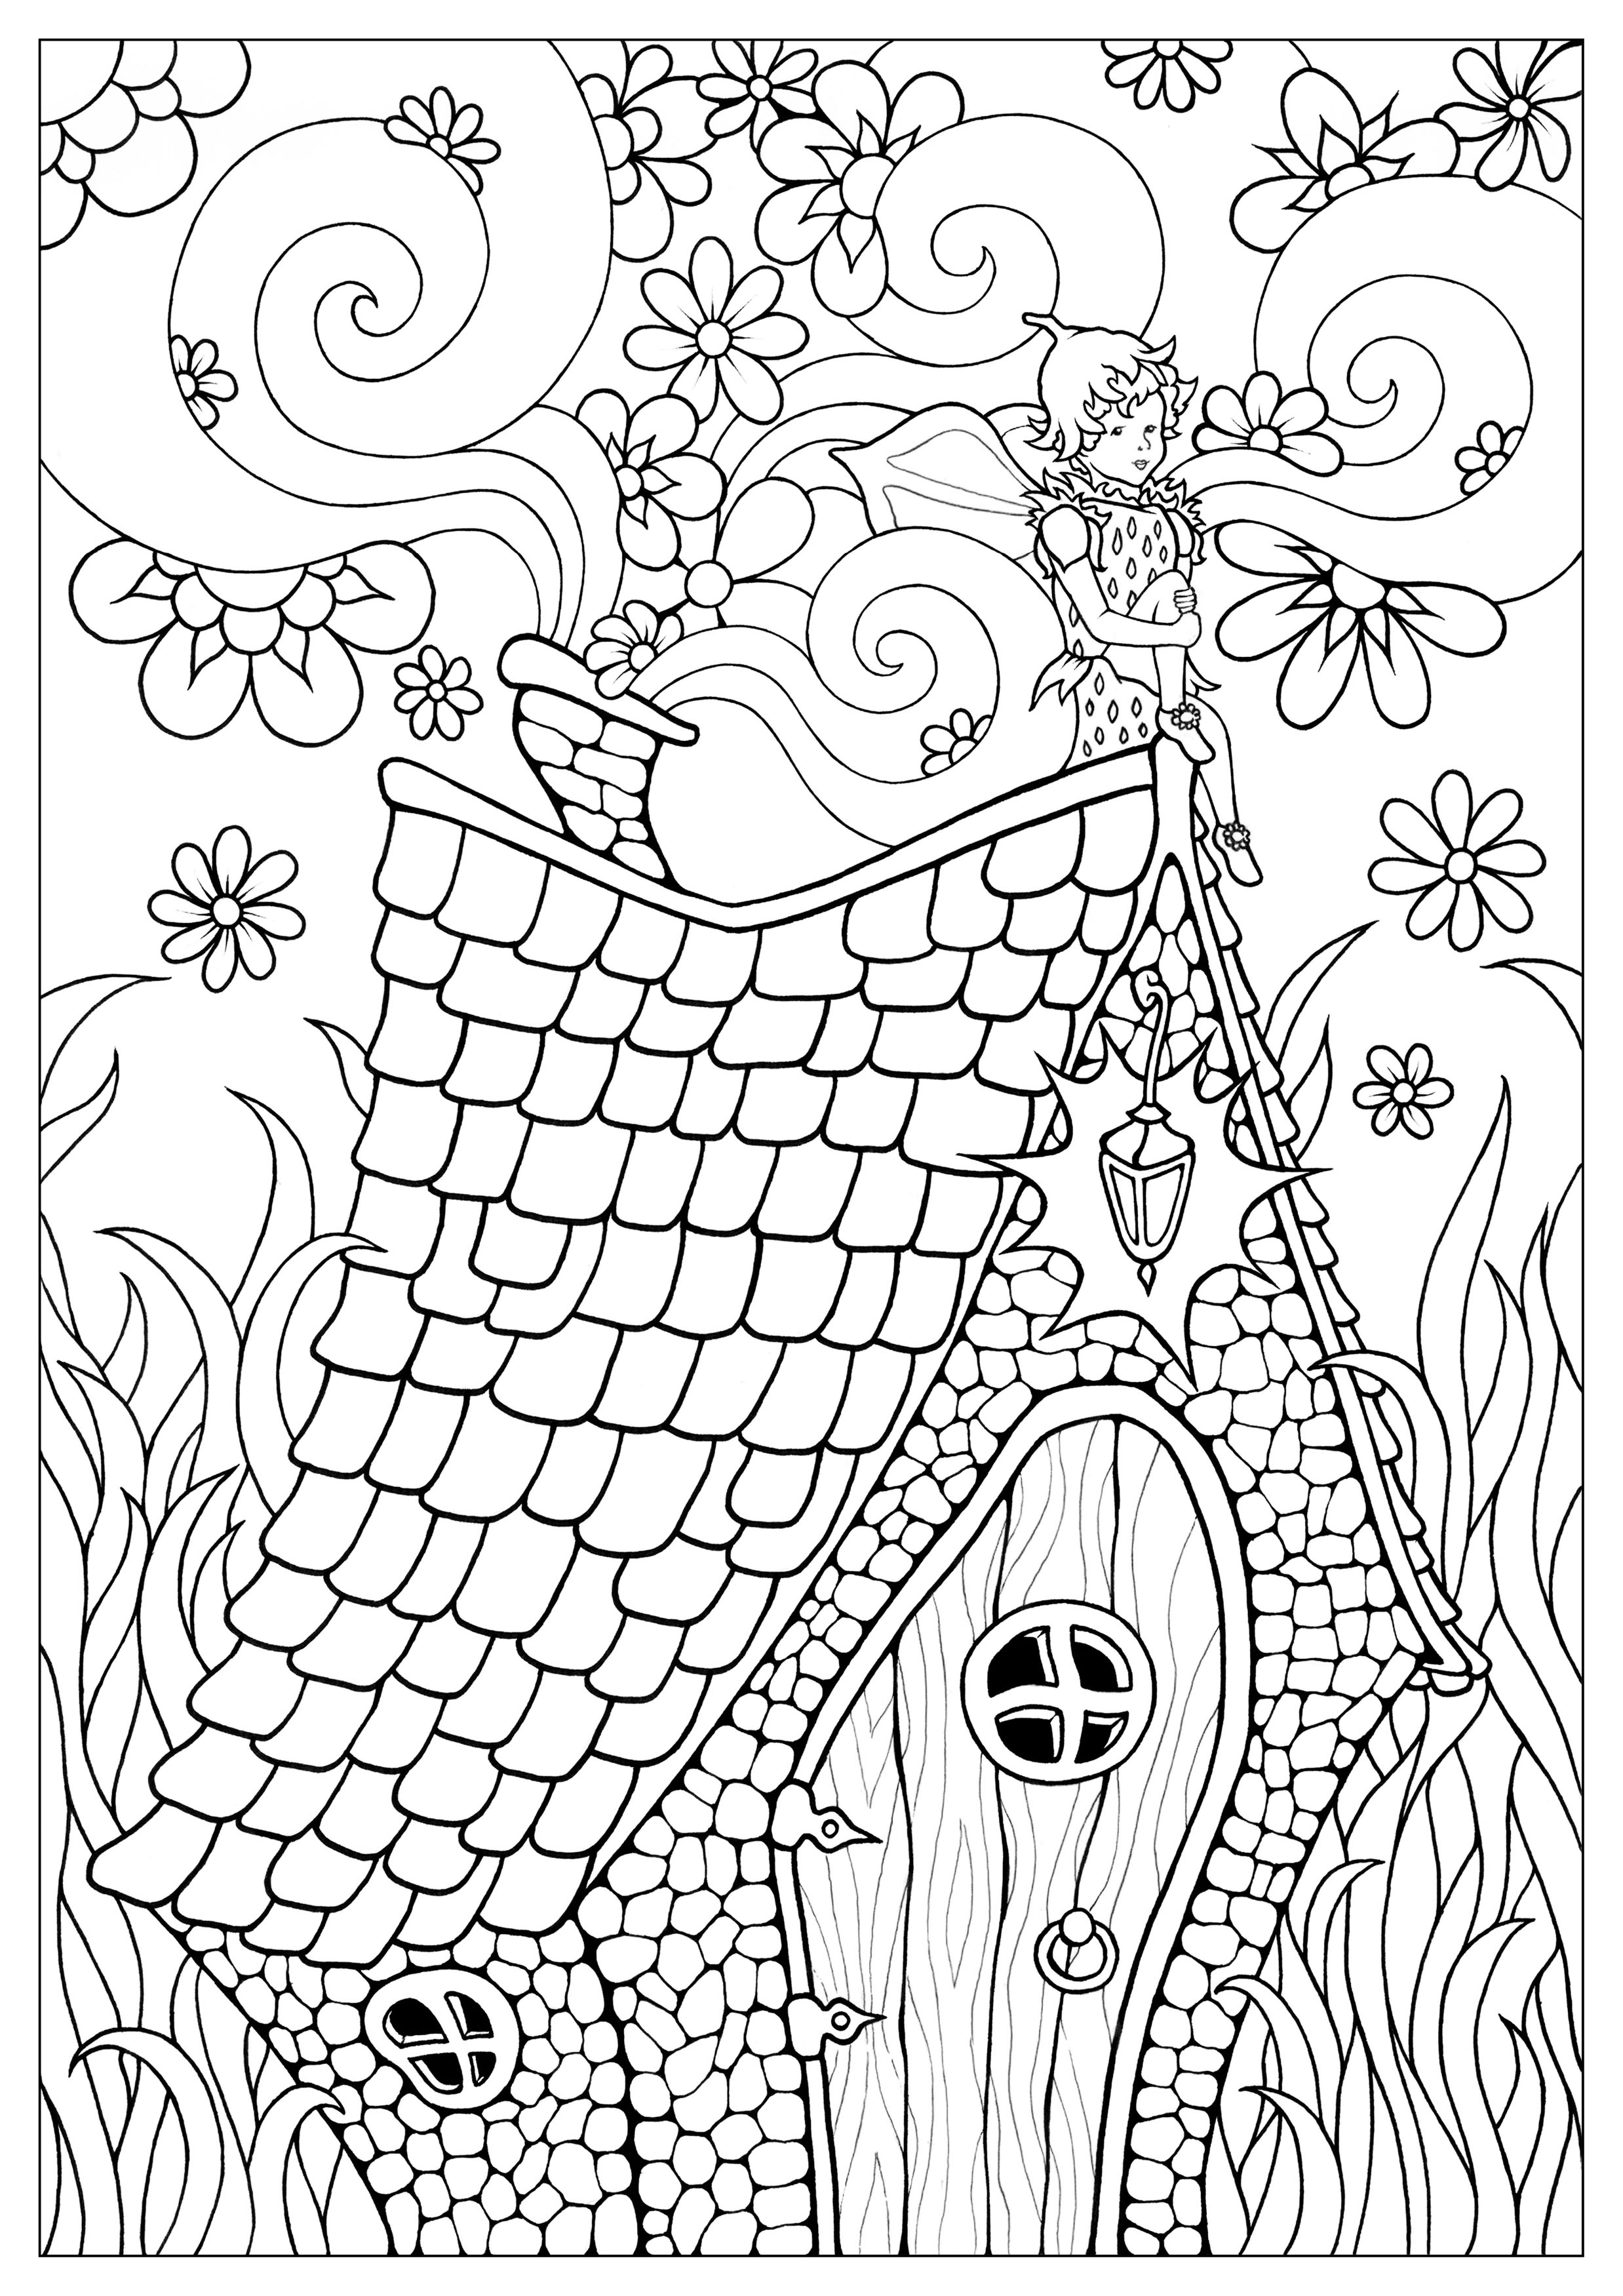 coloring-pages-and-fairy